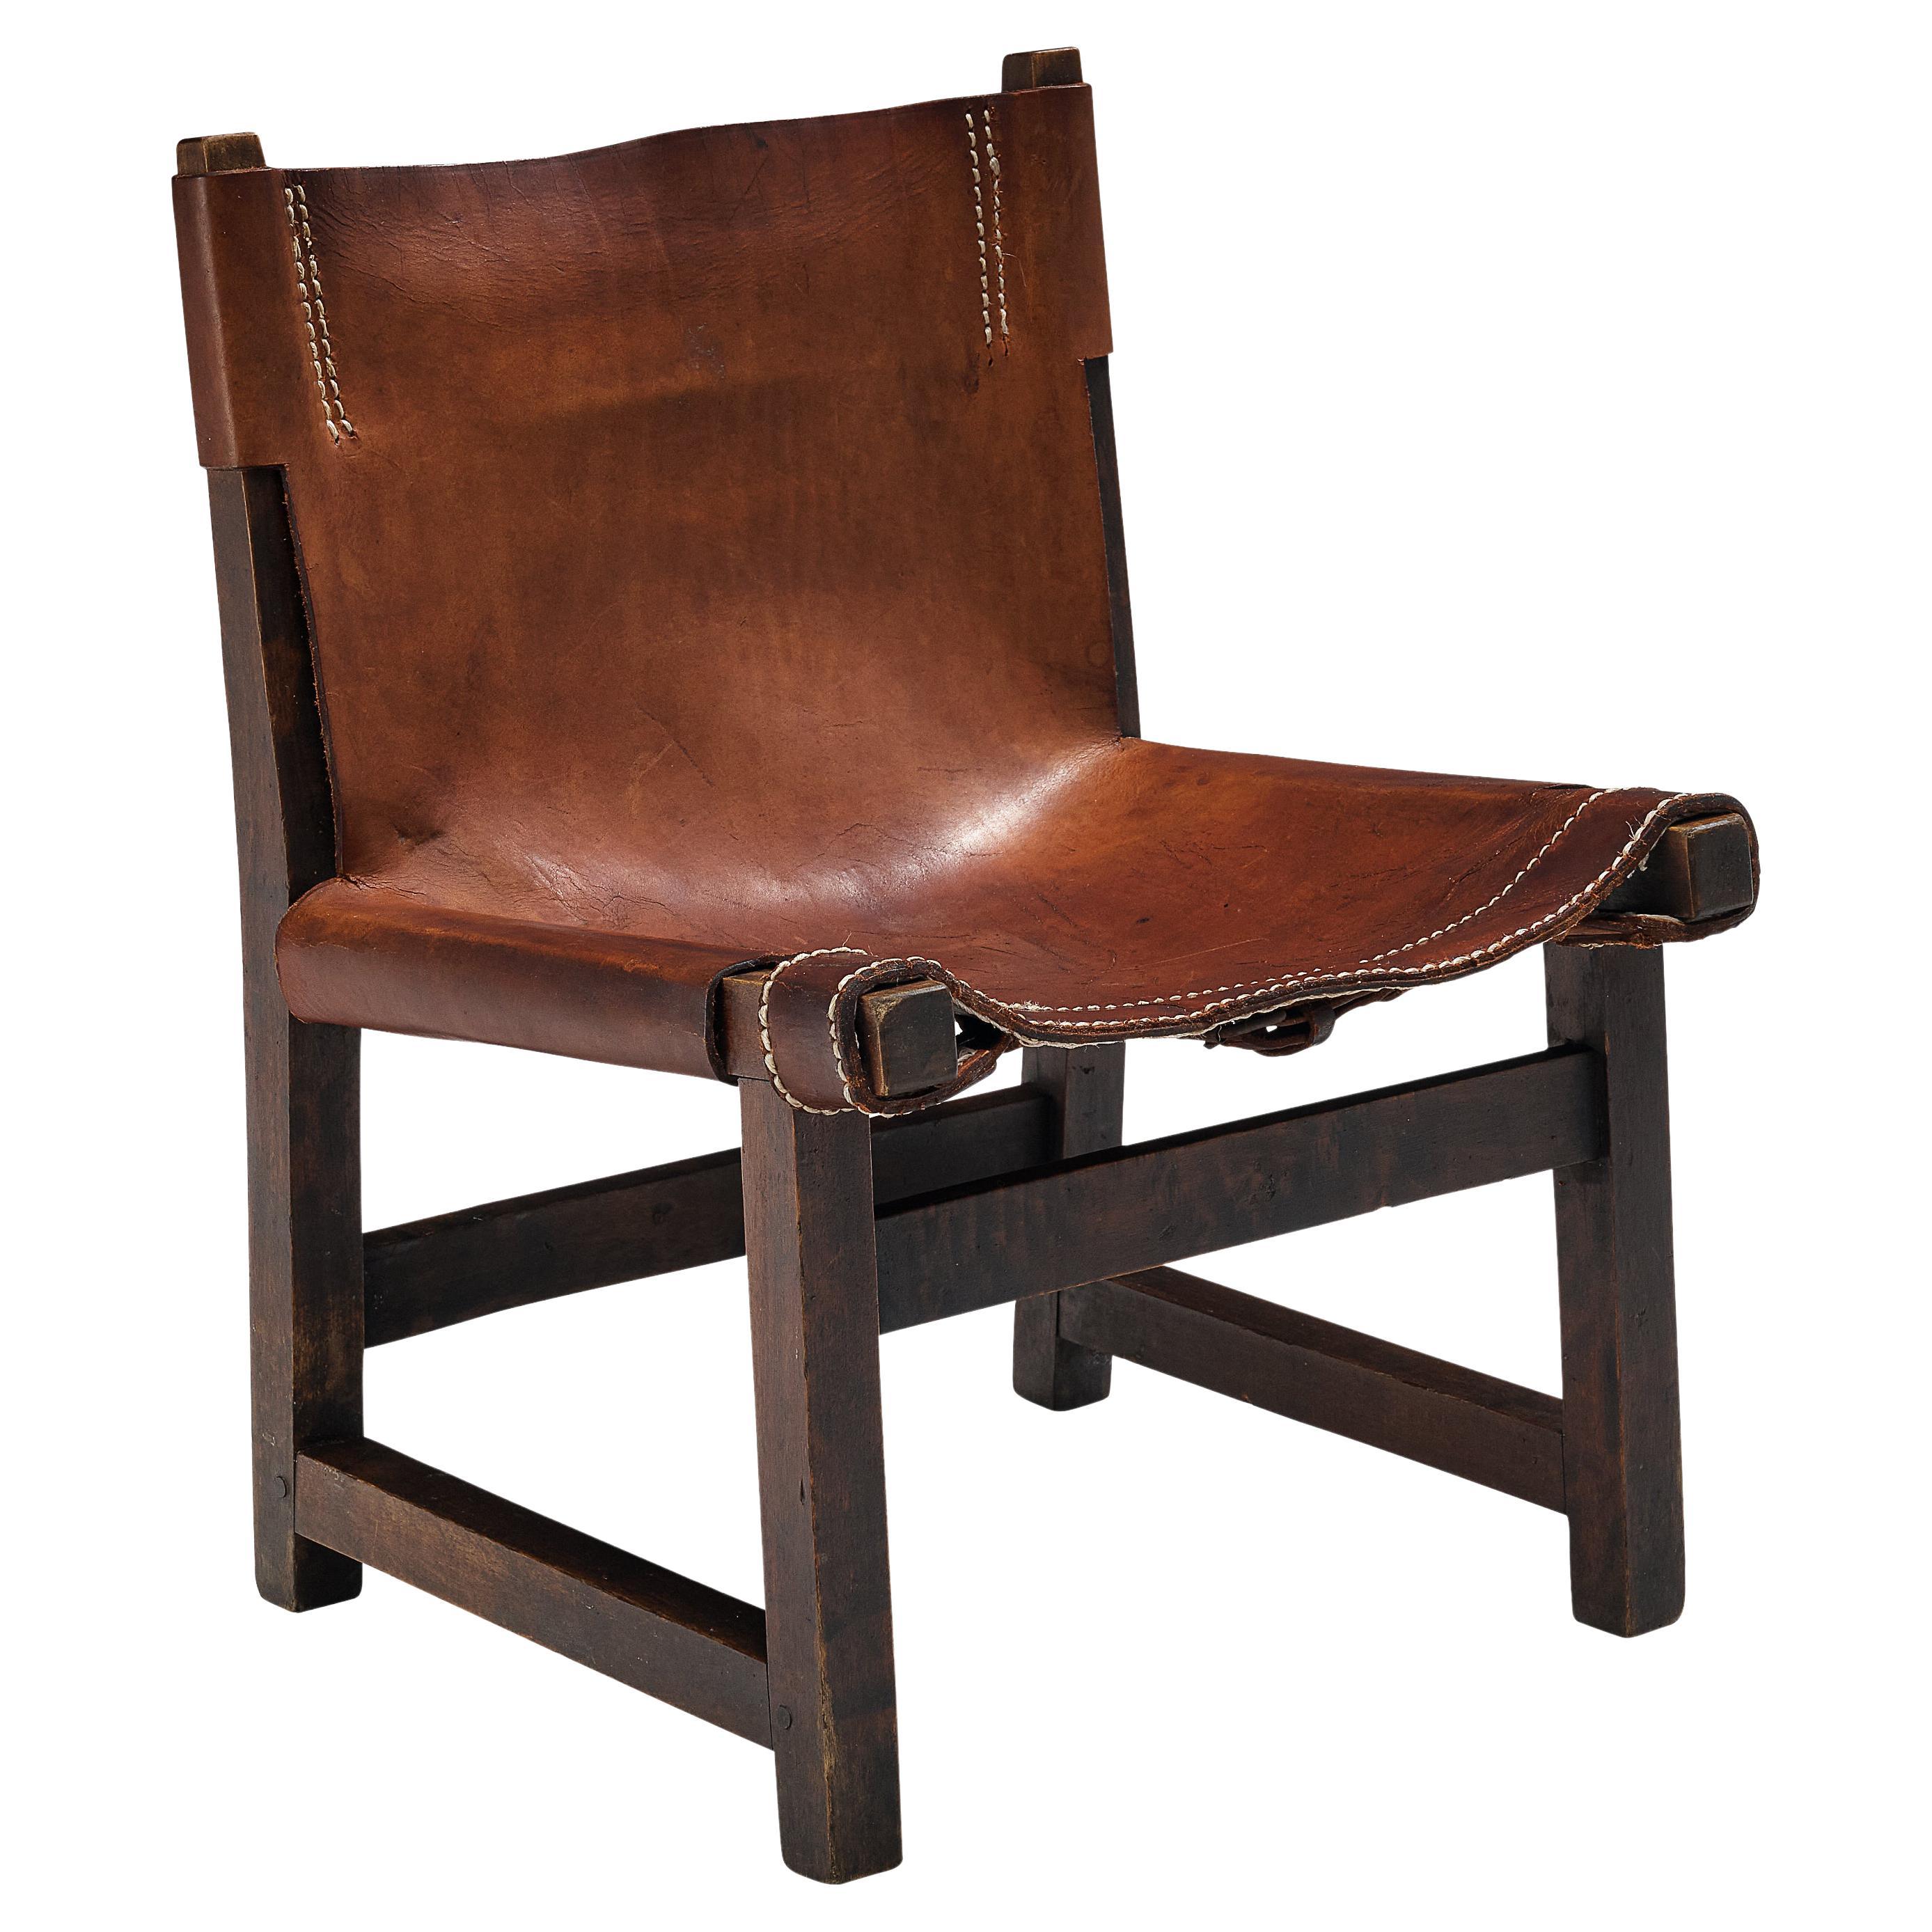 Paco Muñoz 'Riaza' Hunting Children's Chair in Walnut and Leather